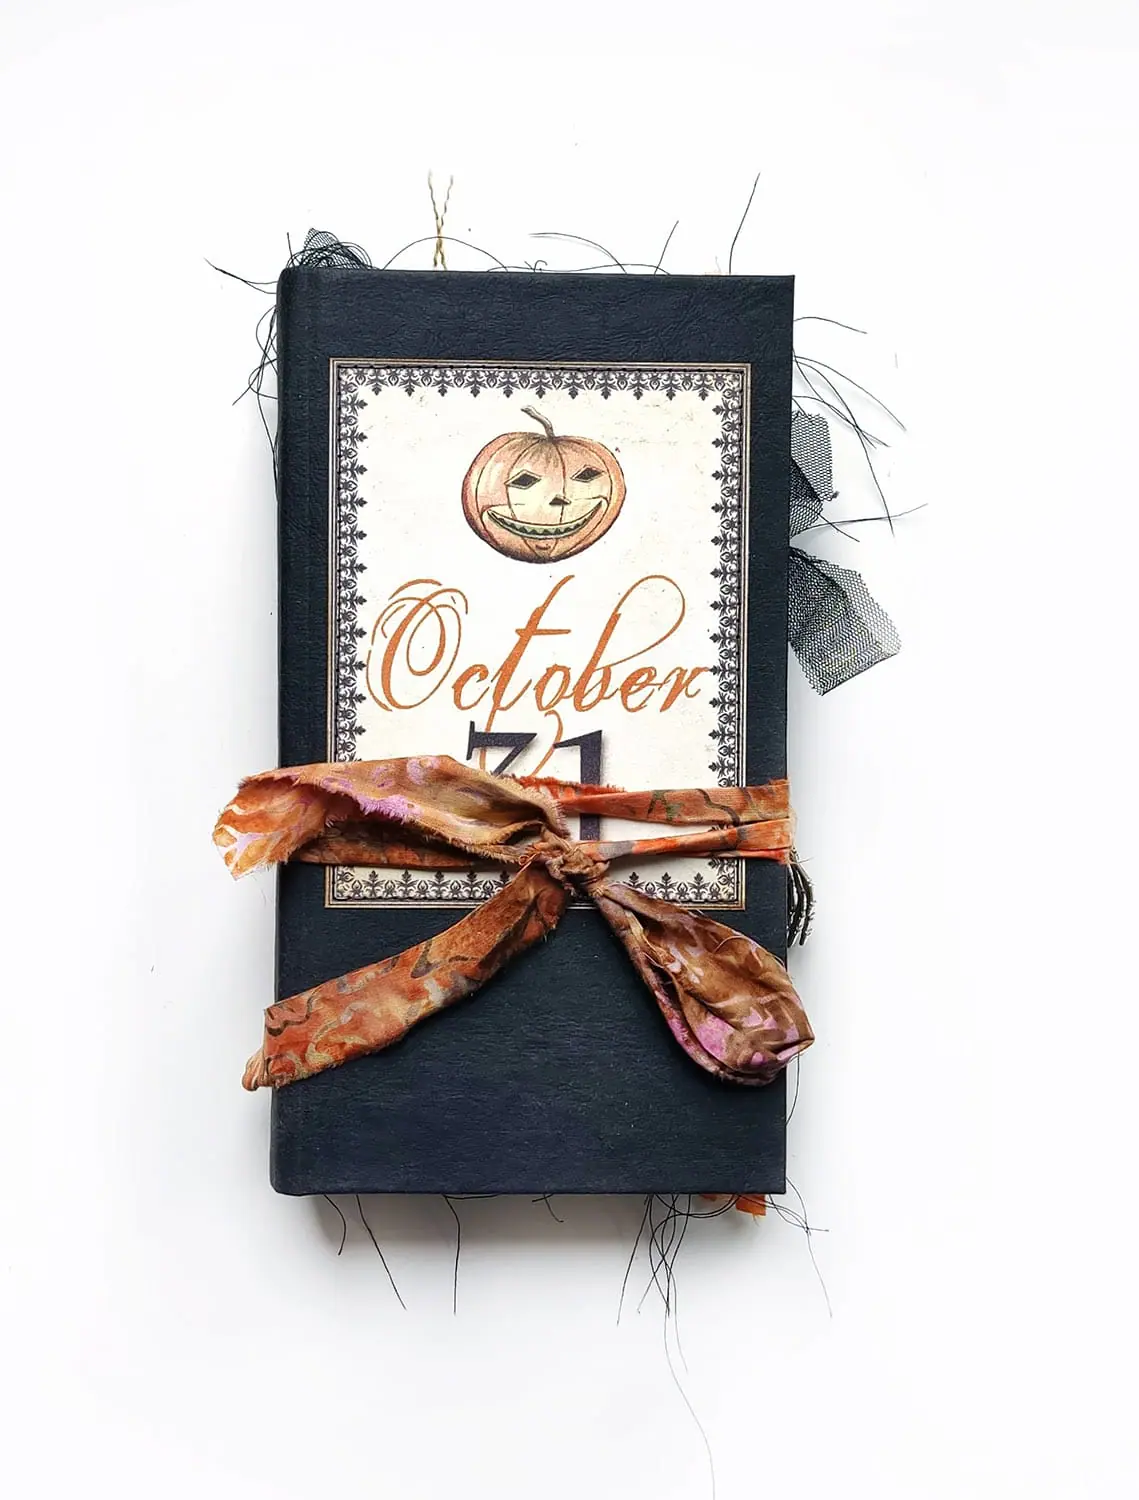 Papercraft - Witchy Journal/junk journal and other junk journals